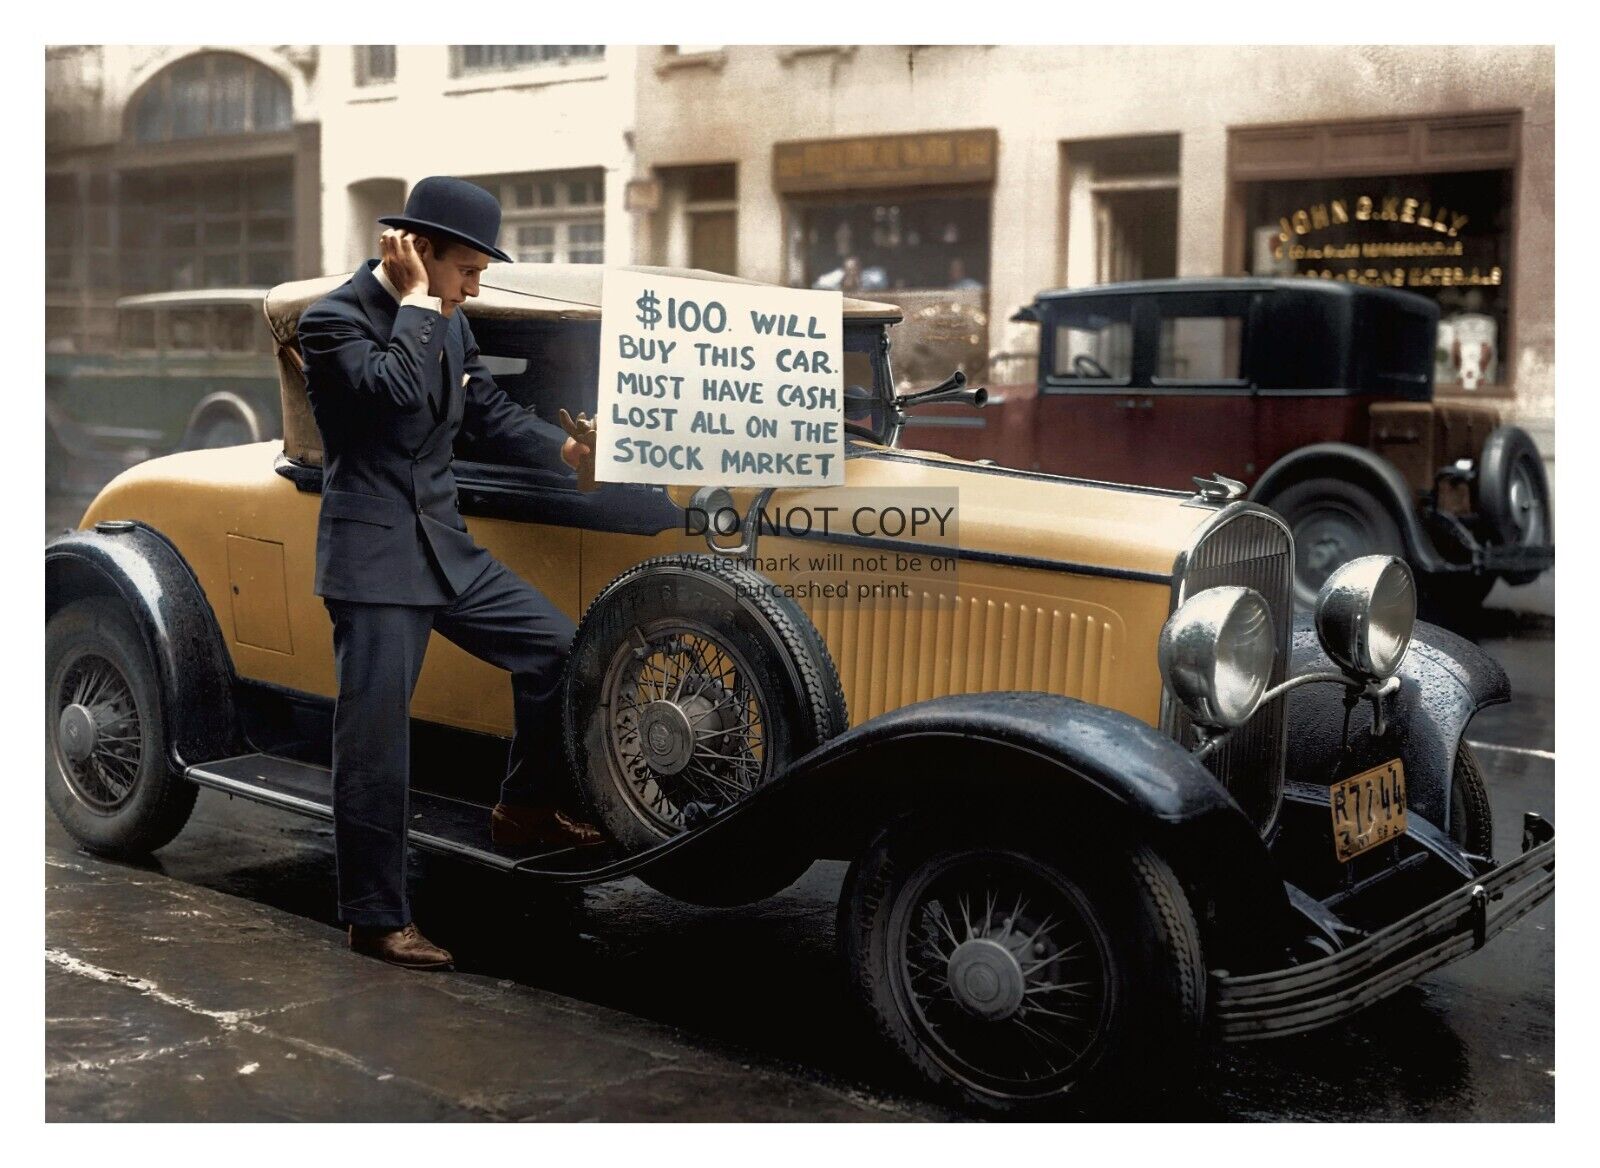 MAN SELLING HIS CAR FOR $100 AFTER BLACK TUESDAY STOCK MARKET CRASH 5X7 PHOTO